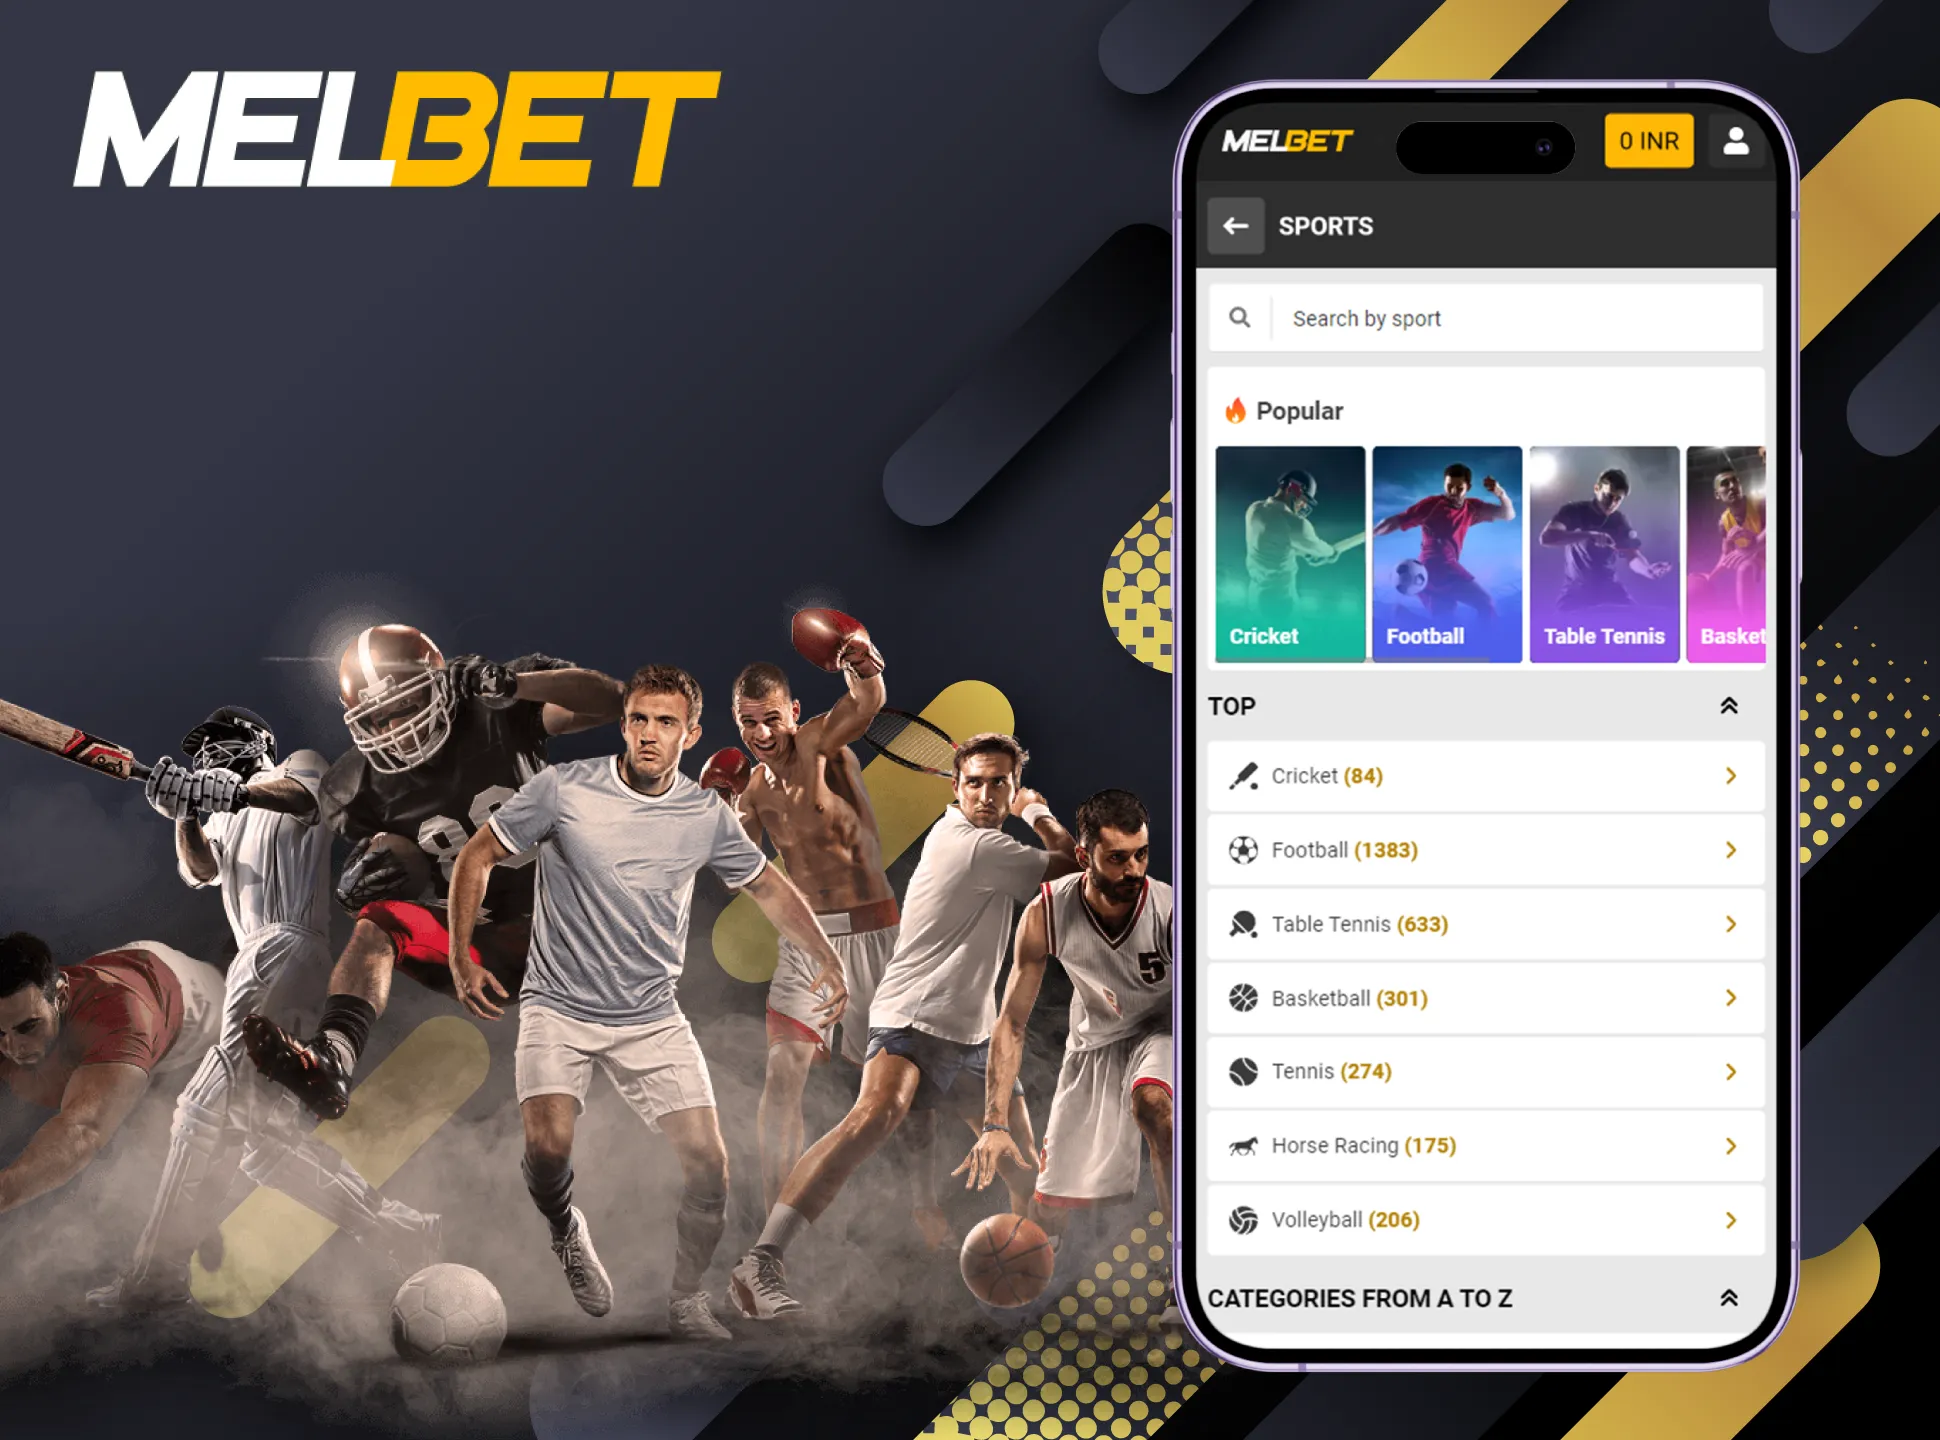 The Melbet sportsbook has a wide range of available sports for betting online.